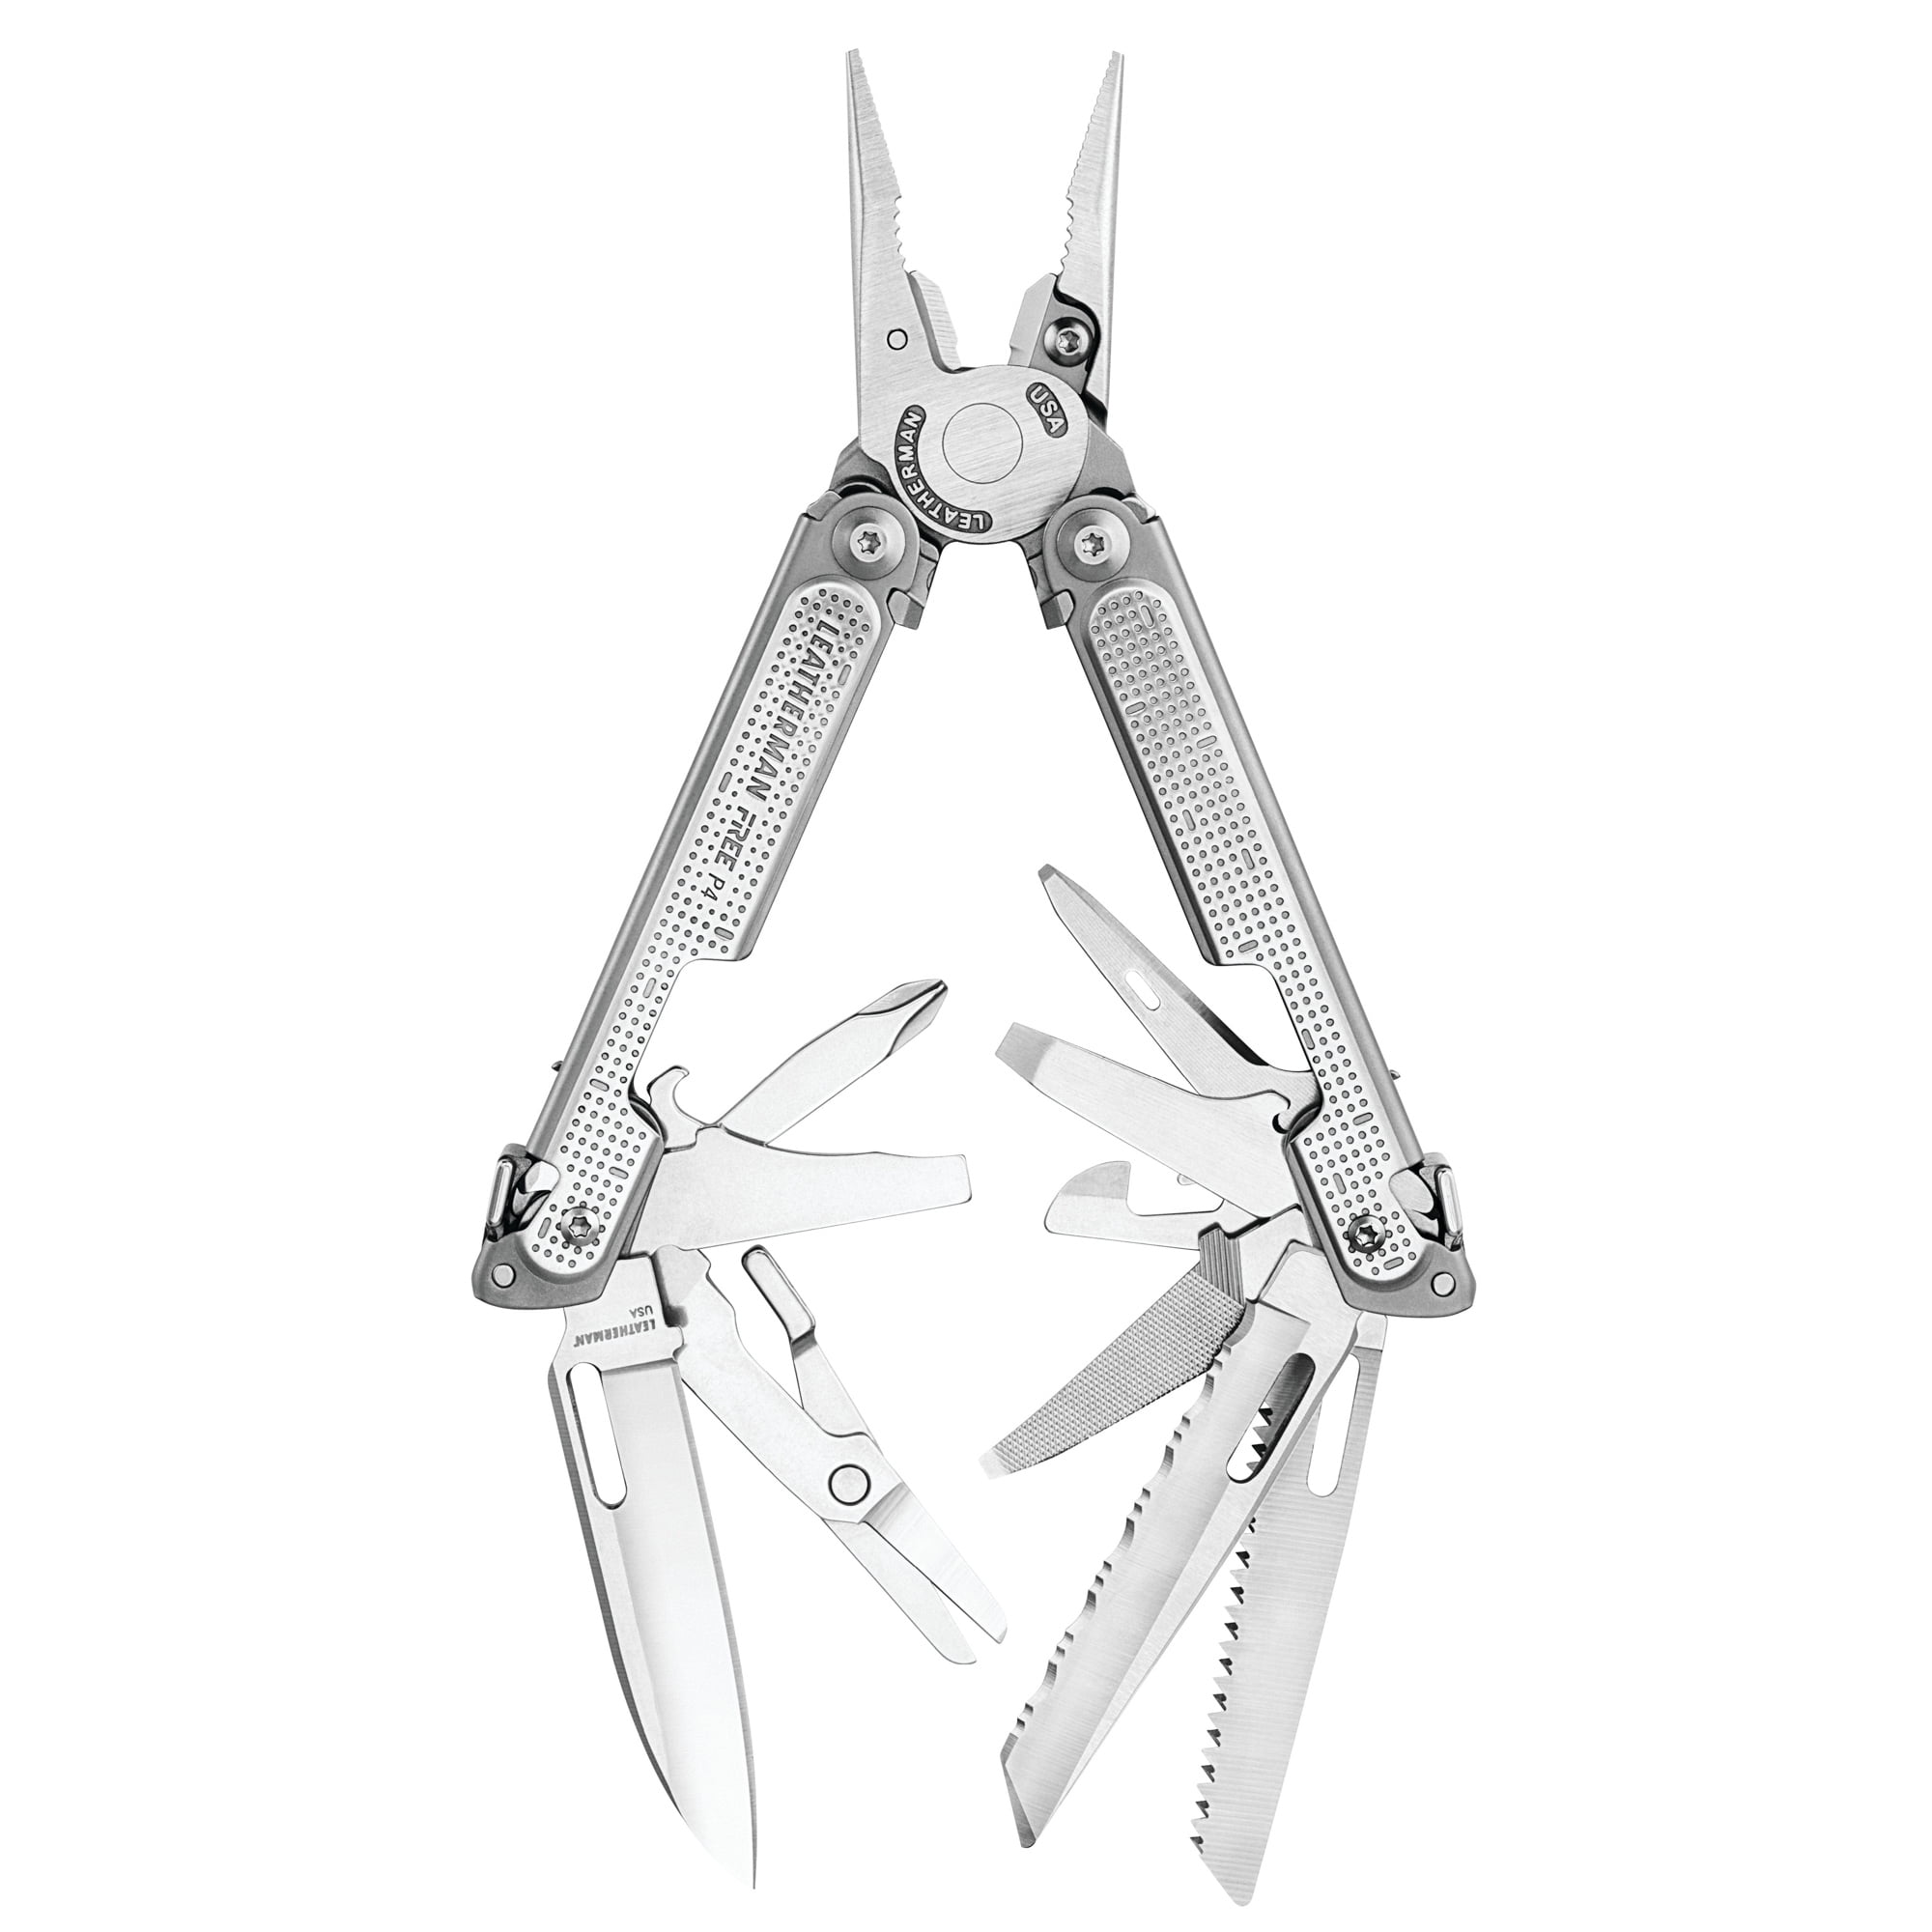 Leatherman Style PS 8 in 1 Multi Tool Keychain 1 Black or 1 Blue Stainless Steel 